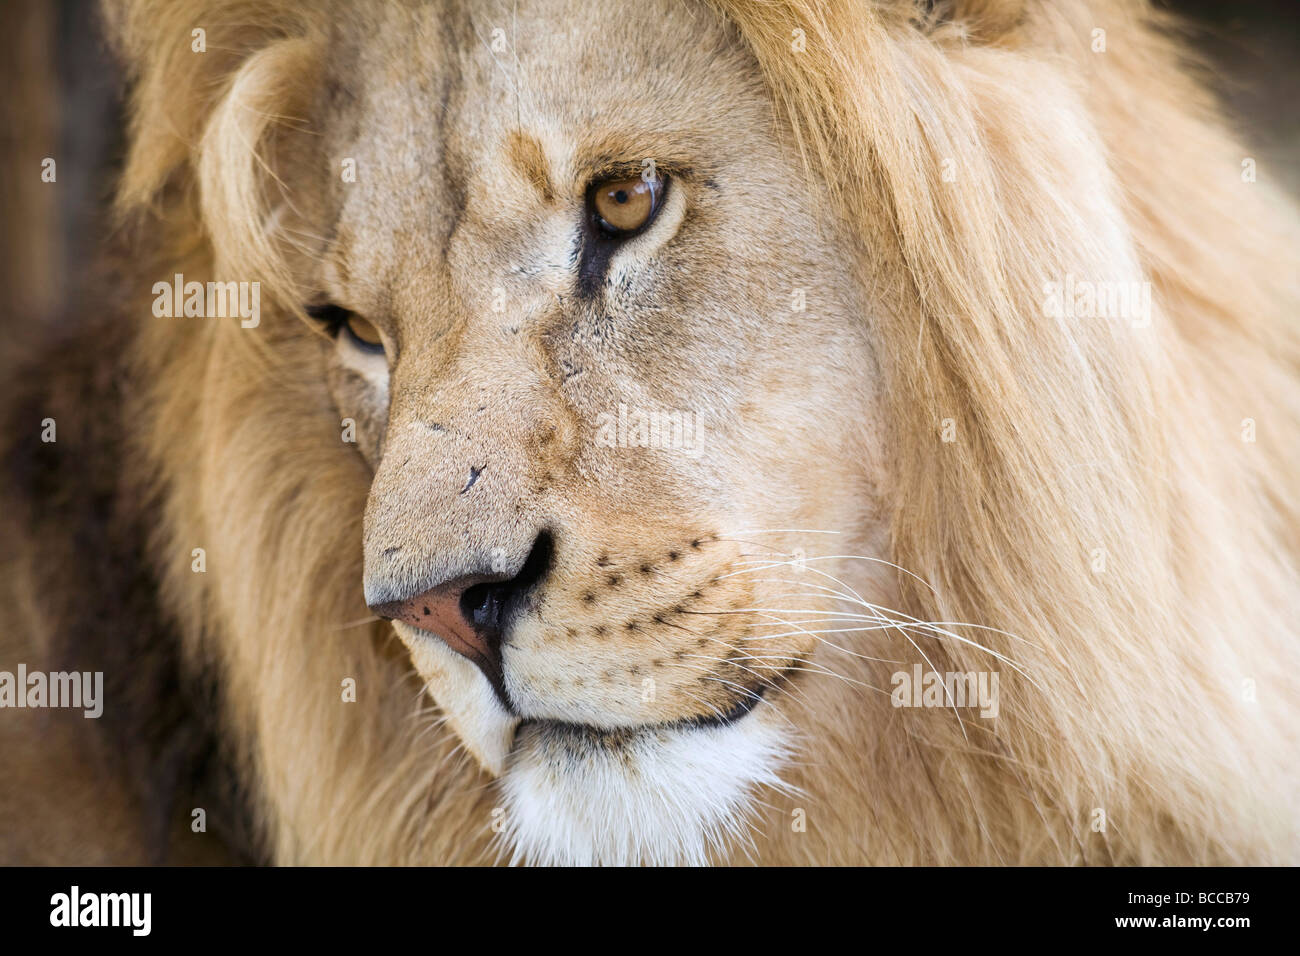 The strong and beautiful face of a male lion very close up Stock Photo